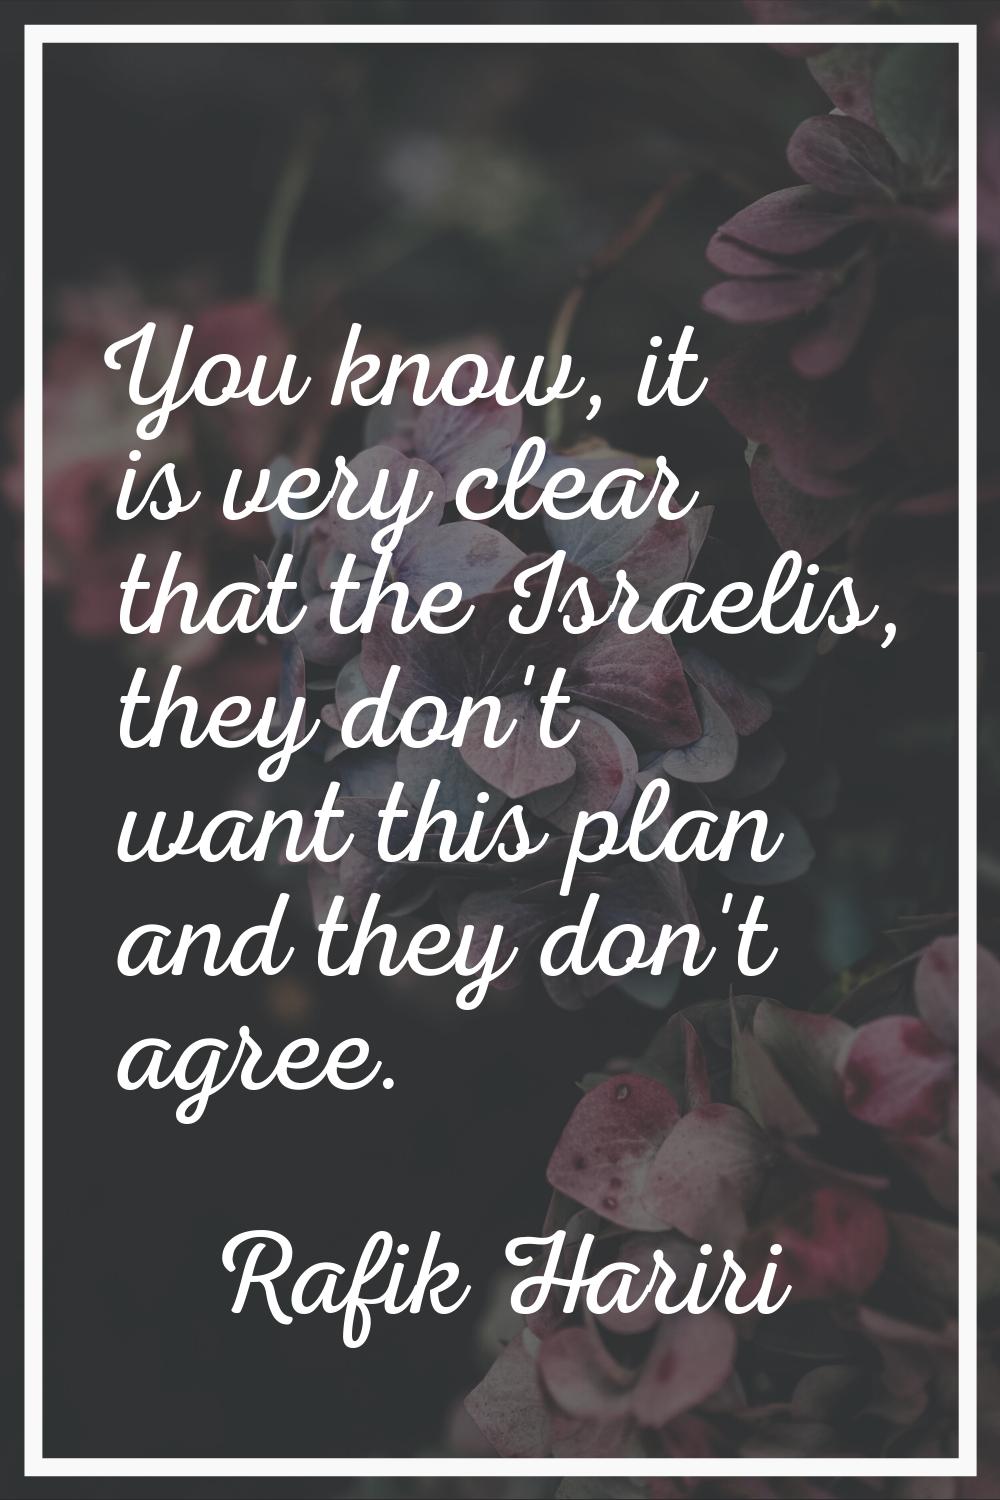 You know, it is very clear that the Israelis, they don't want this plan and they don't agree.